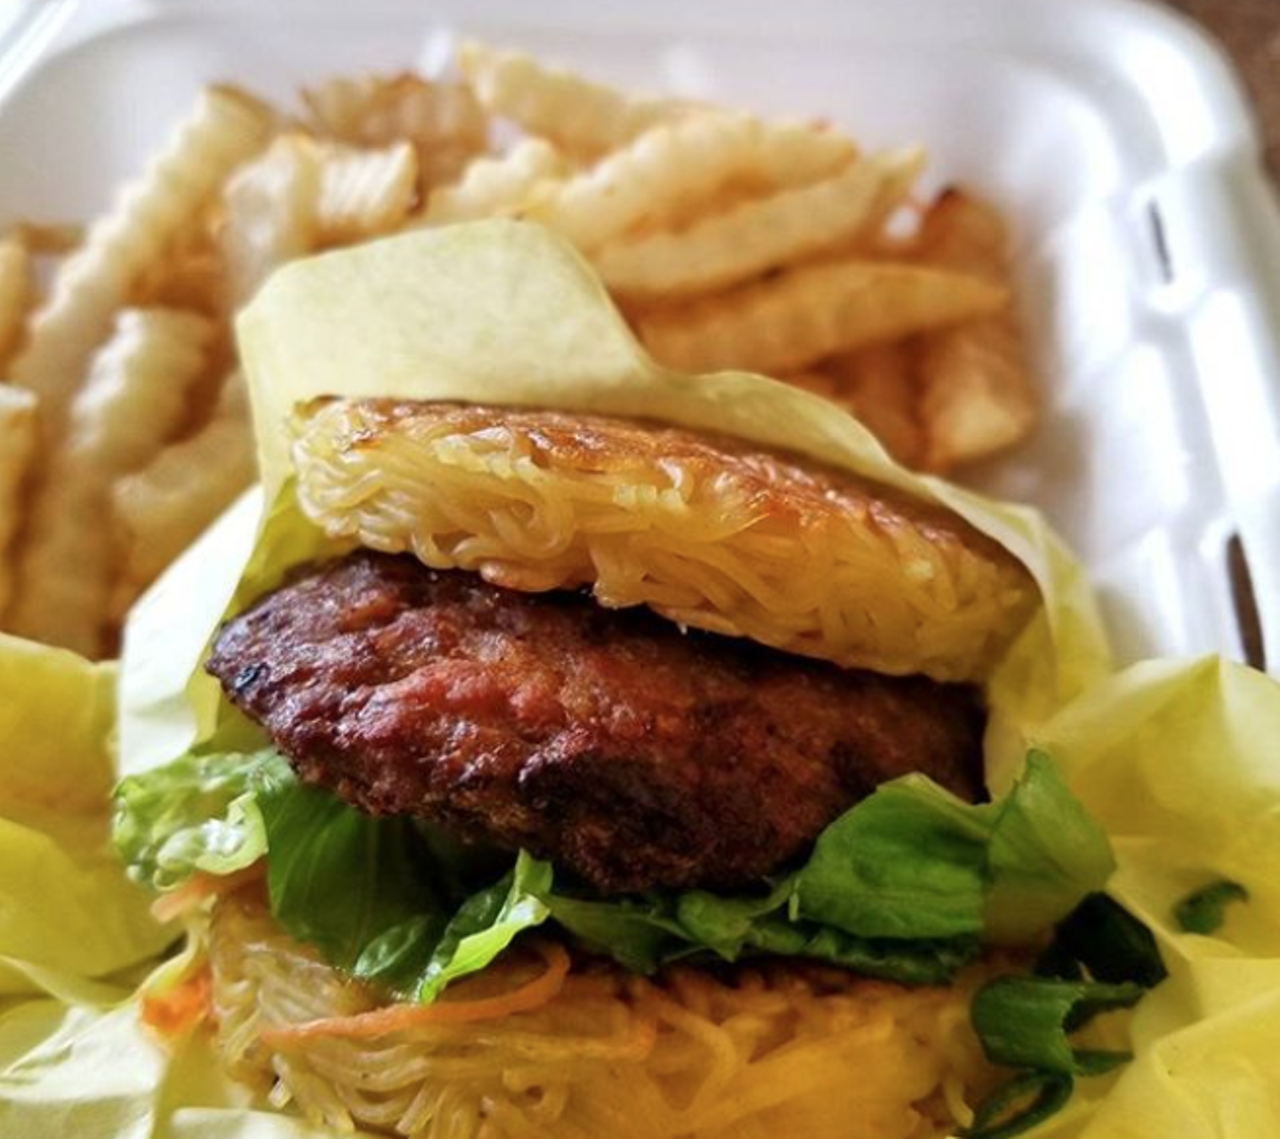 L & L Hawaiian Grill
1302 Austin Hwy #1, (210) 474-6699, llhawaiiangrill.com
With all of the meals automatically coming in Styrofoam containers, L & L is a perfect spot for lunch on-the-go. Go for classics with a twist, like the ramen burger, or opt for a true Hawaiian dish, like the Loco Moco (hamburger patties over white rice, topped with 2 eggs, covered with brown gravy).
Photo via Instagram / meatsquadtx